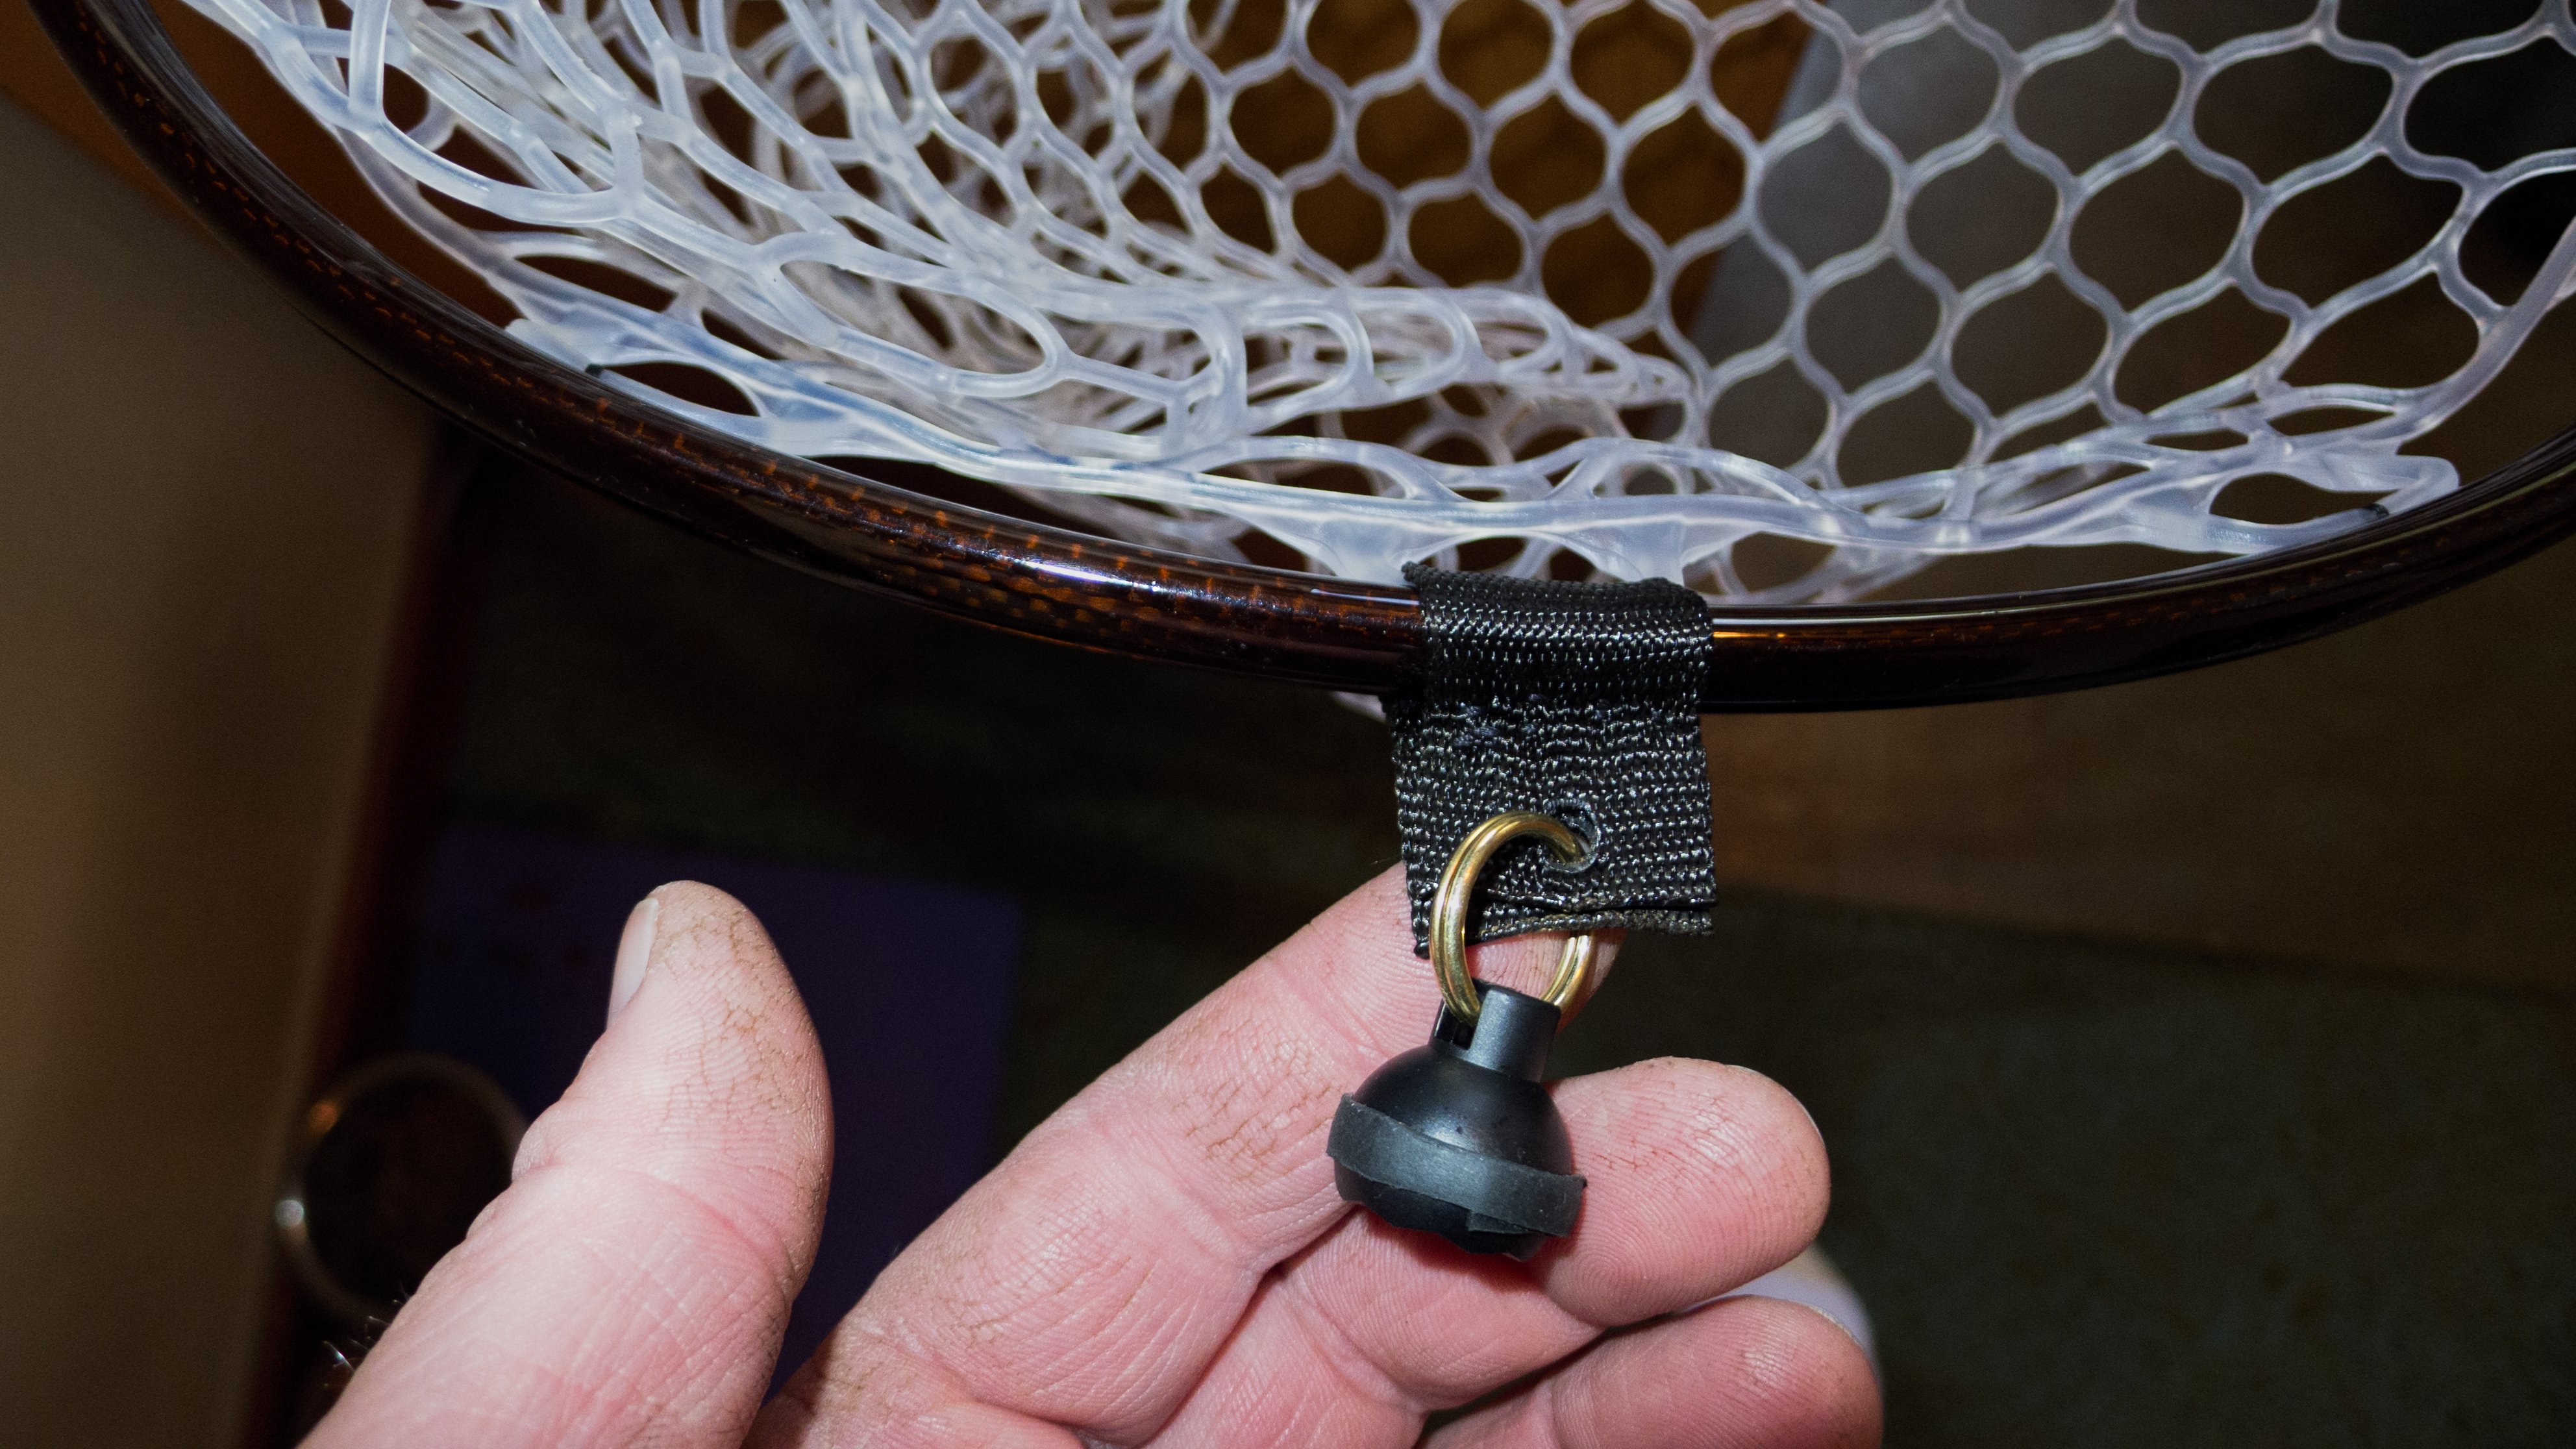 Magnetic Fish Net Holder  The North American Fly Fishing Forum - sponsored  by Thomas Turner